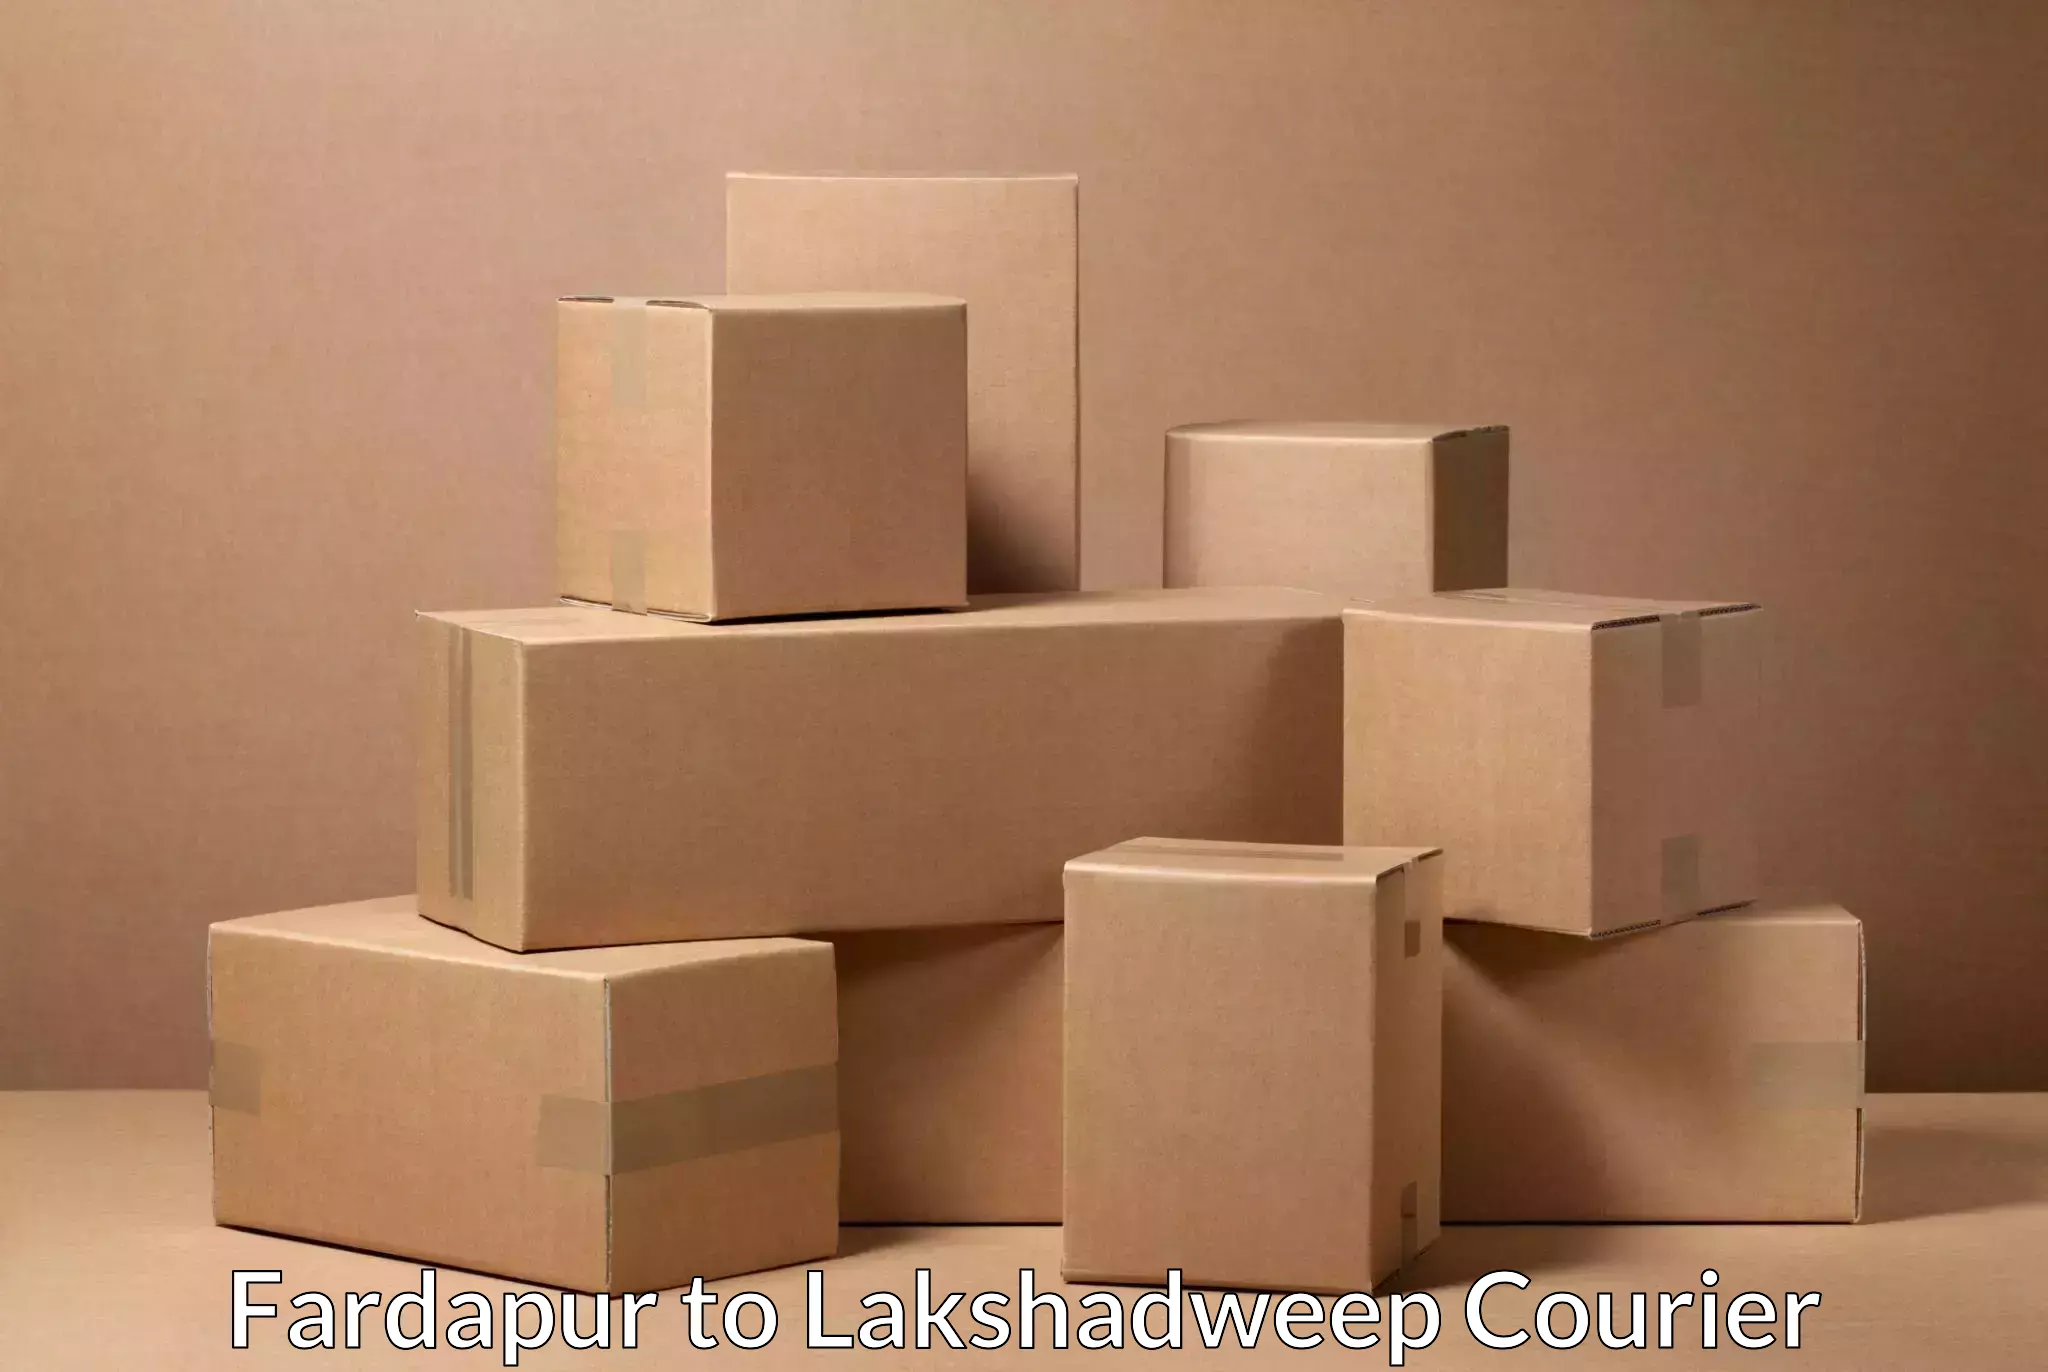 E-commerce logistics support Fardapur to Lakshadweep